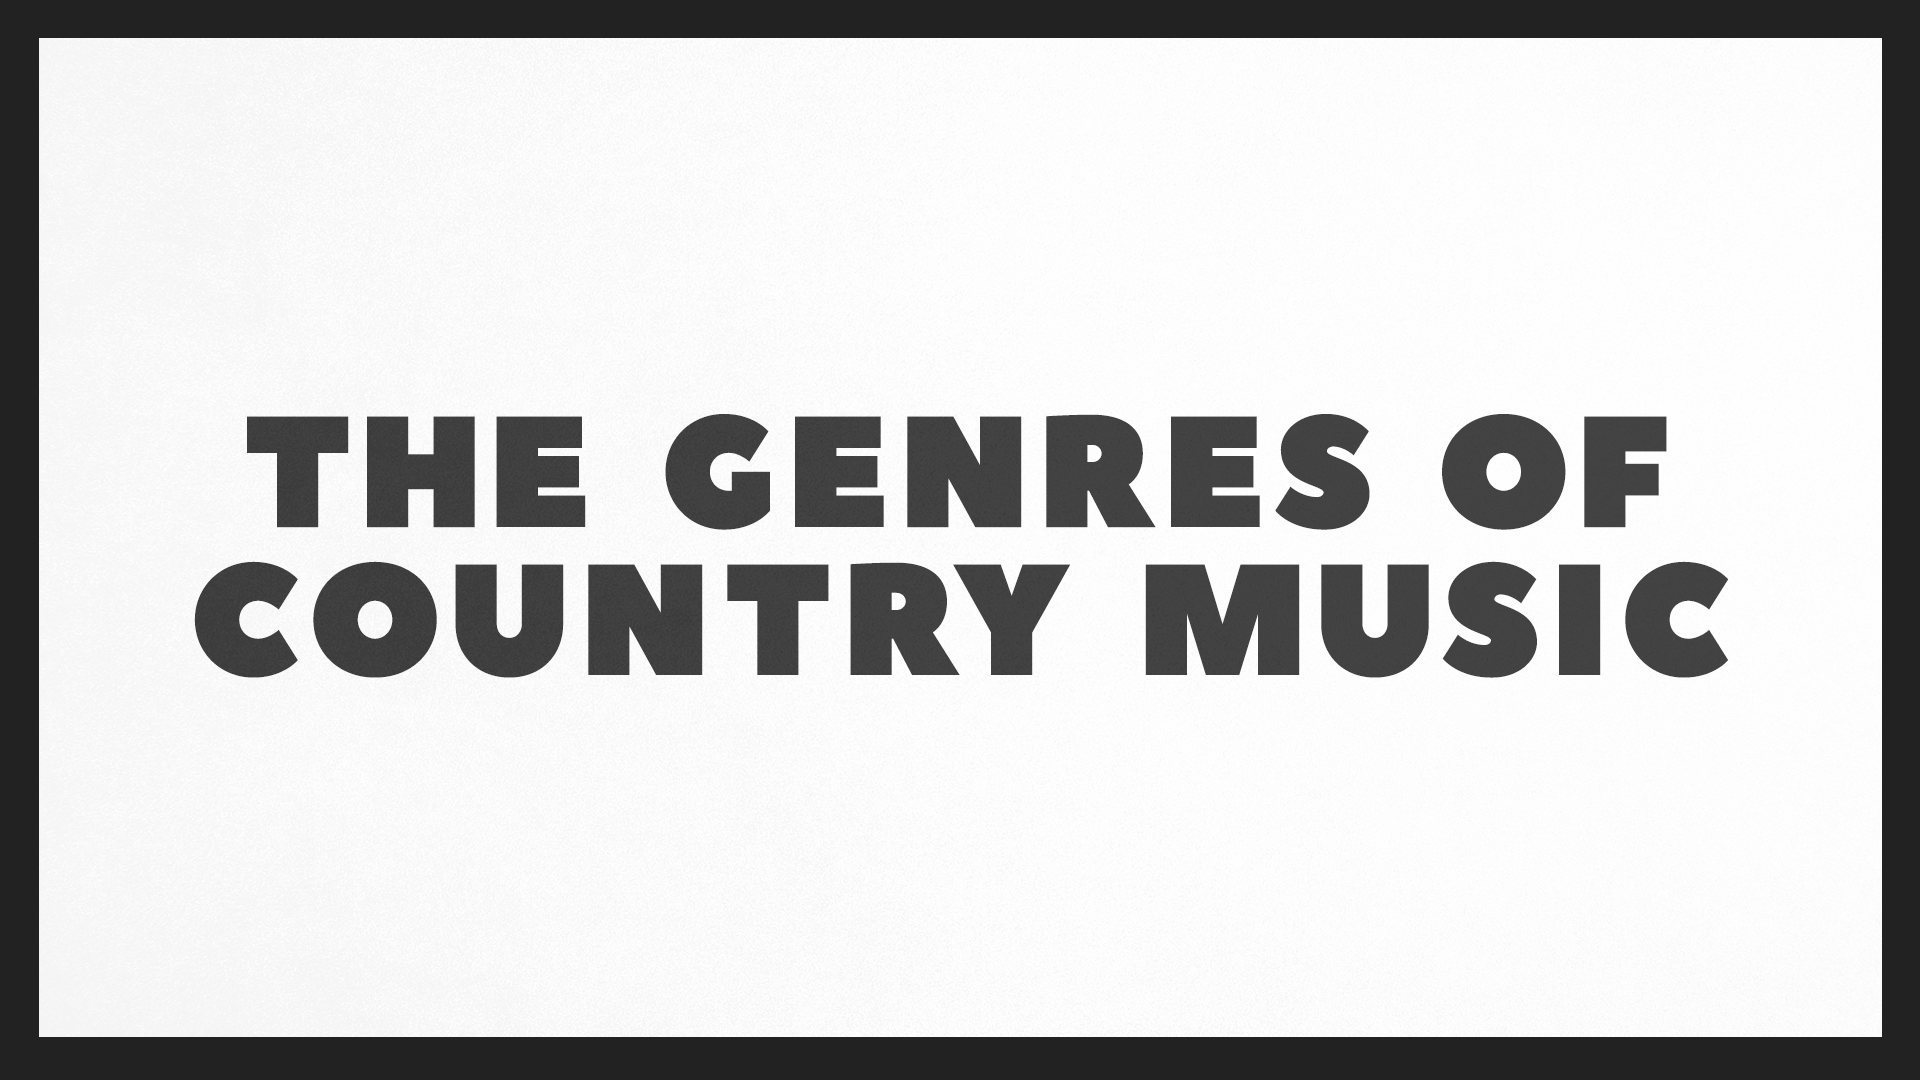 The Genres of Country Music